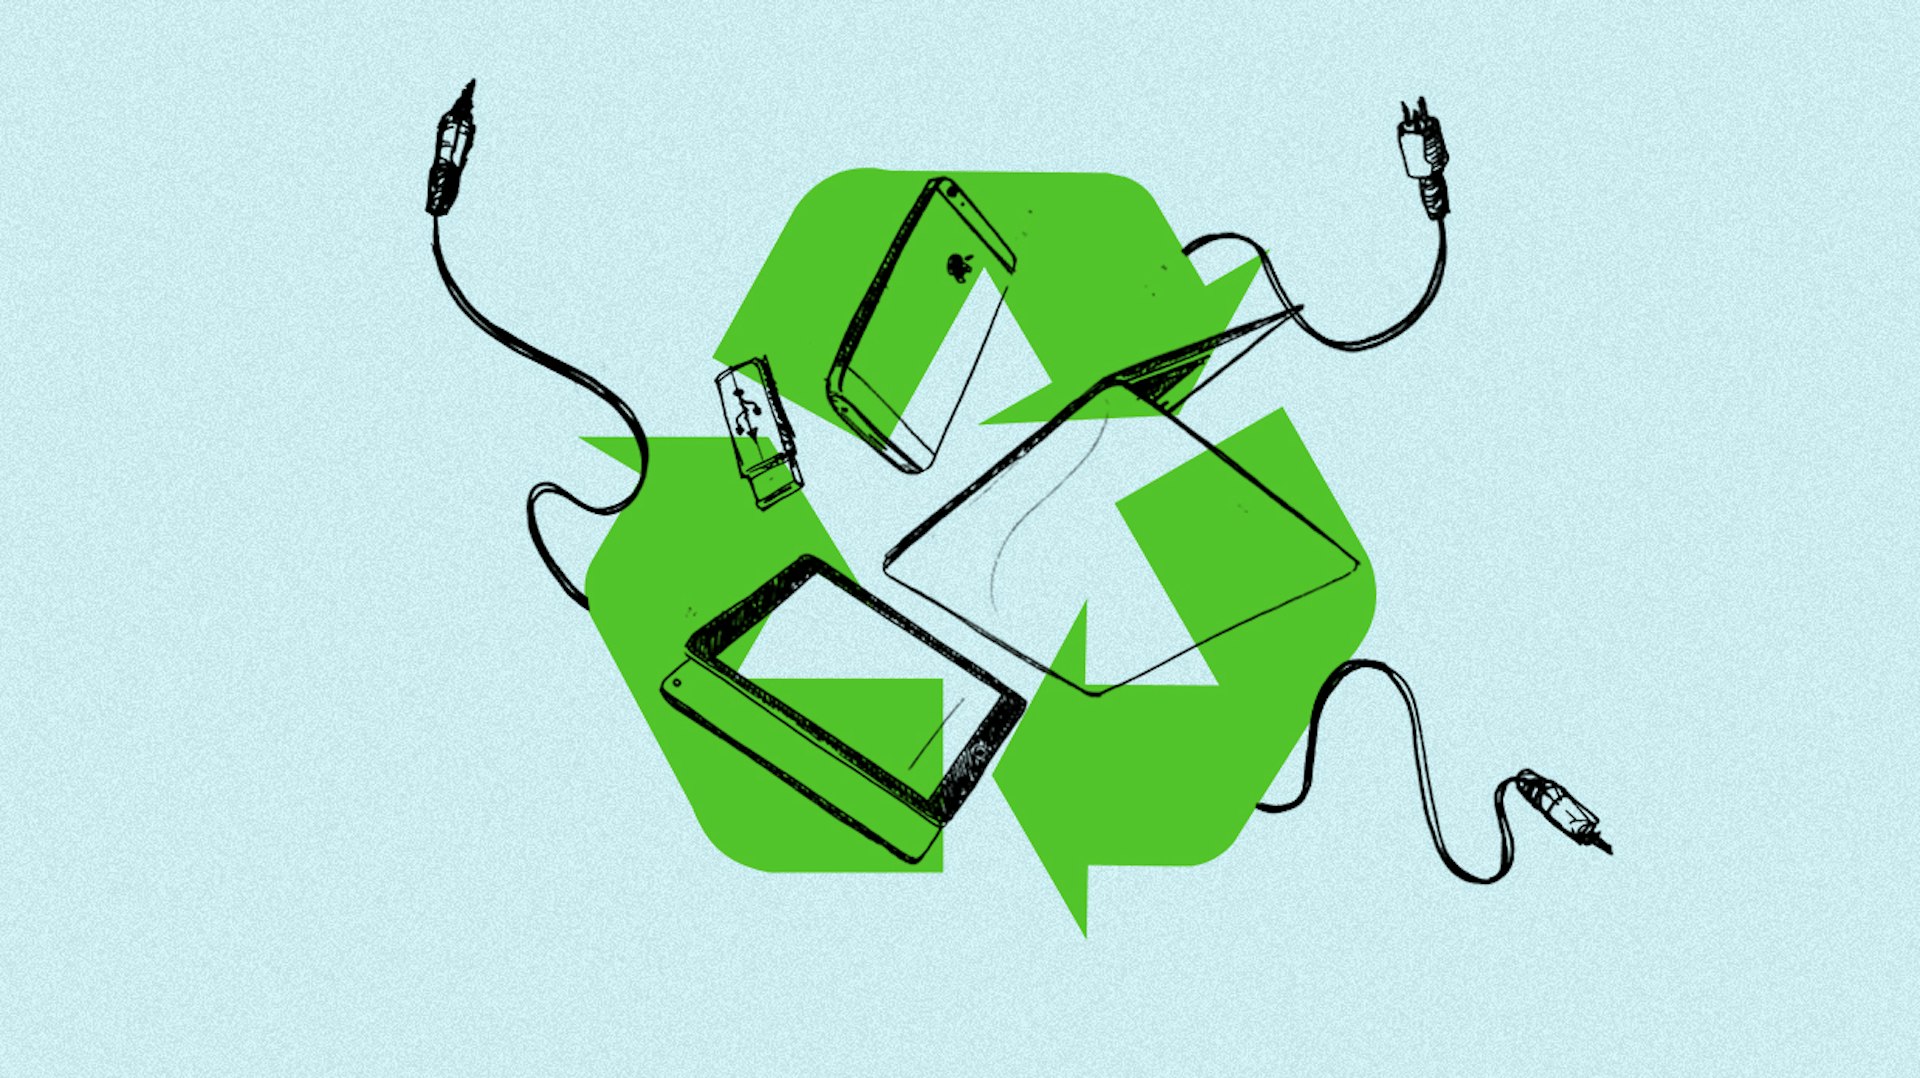 The tech industry has a serious sustainability problem